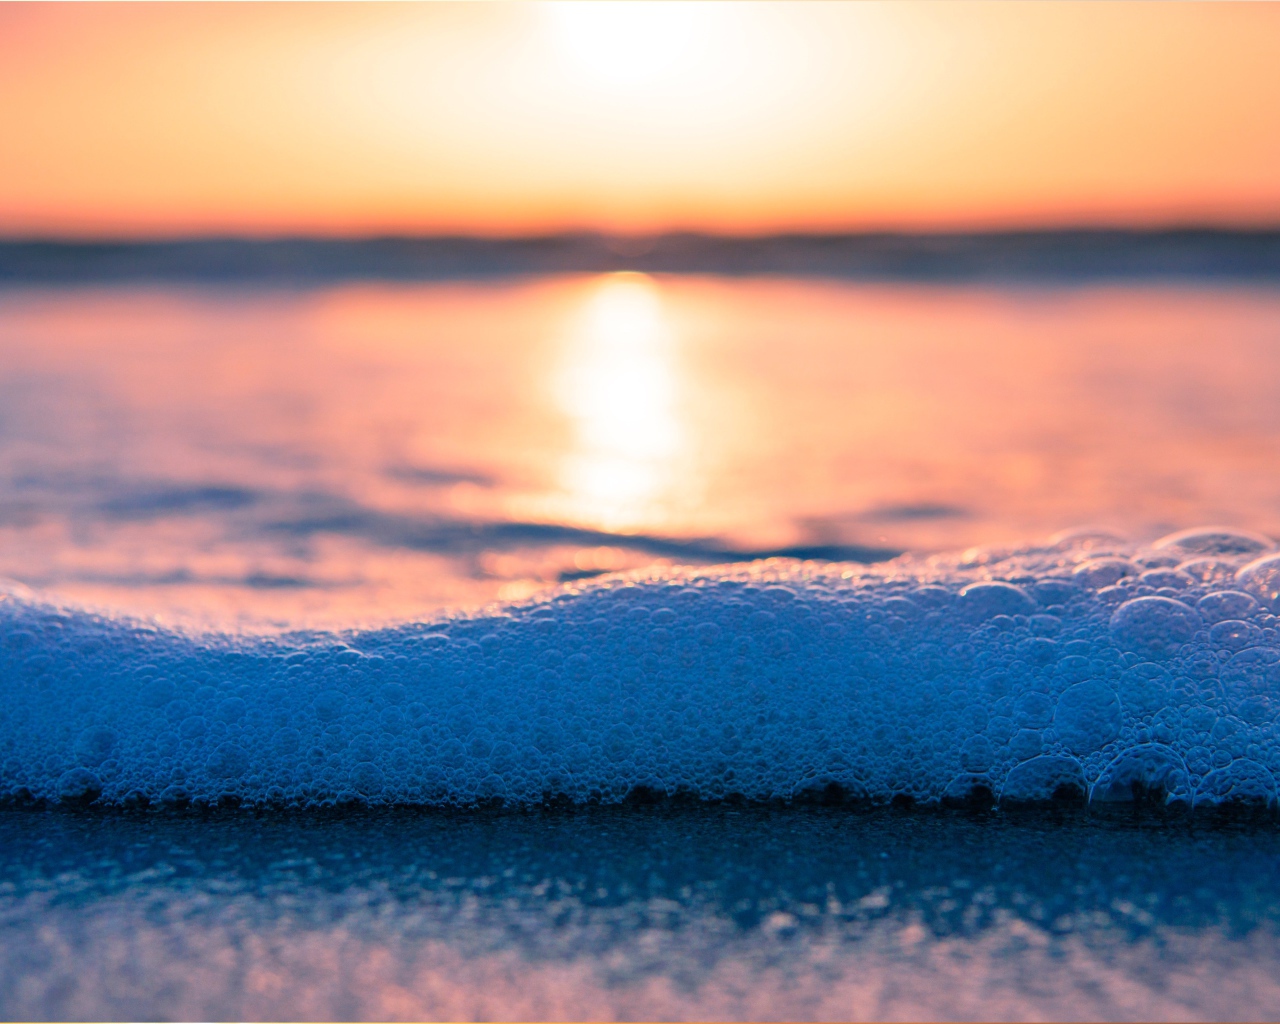 White sea foam with bubbles at sunset